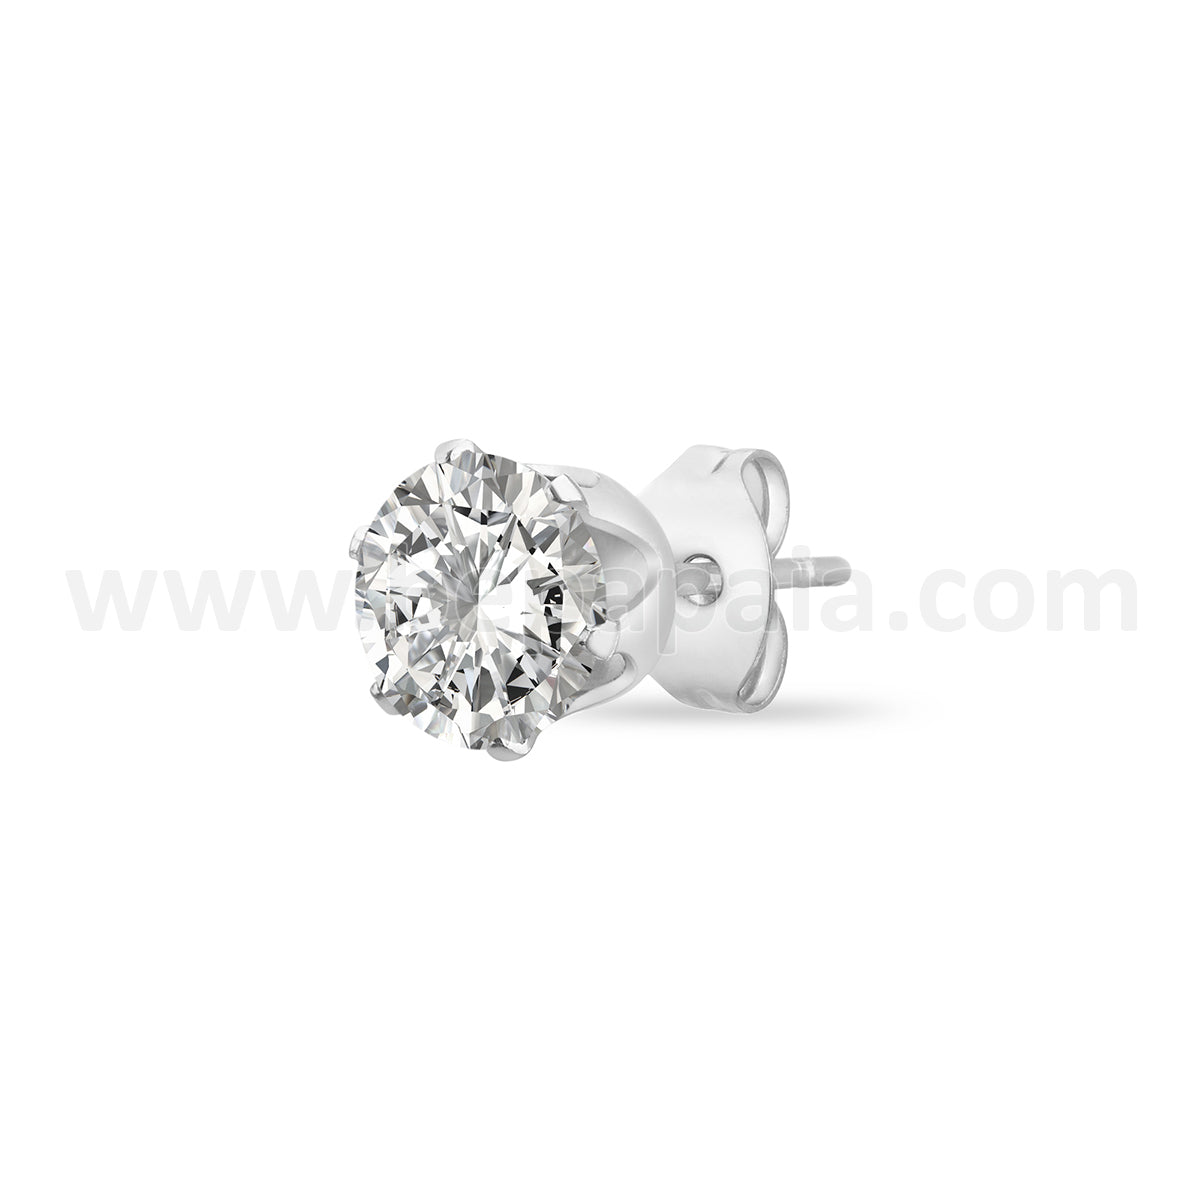 Steel ear studs with round-set cubic zirconia